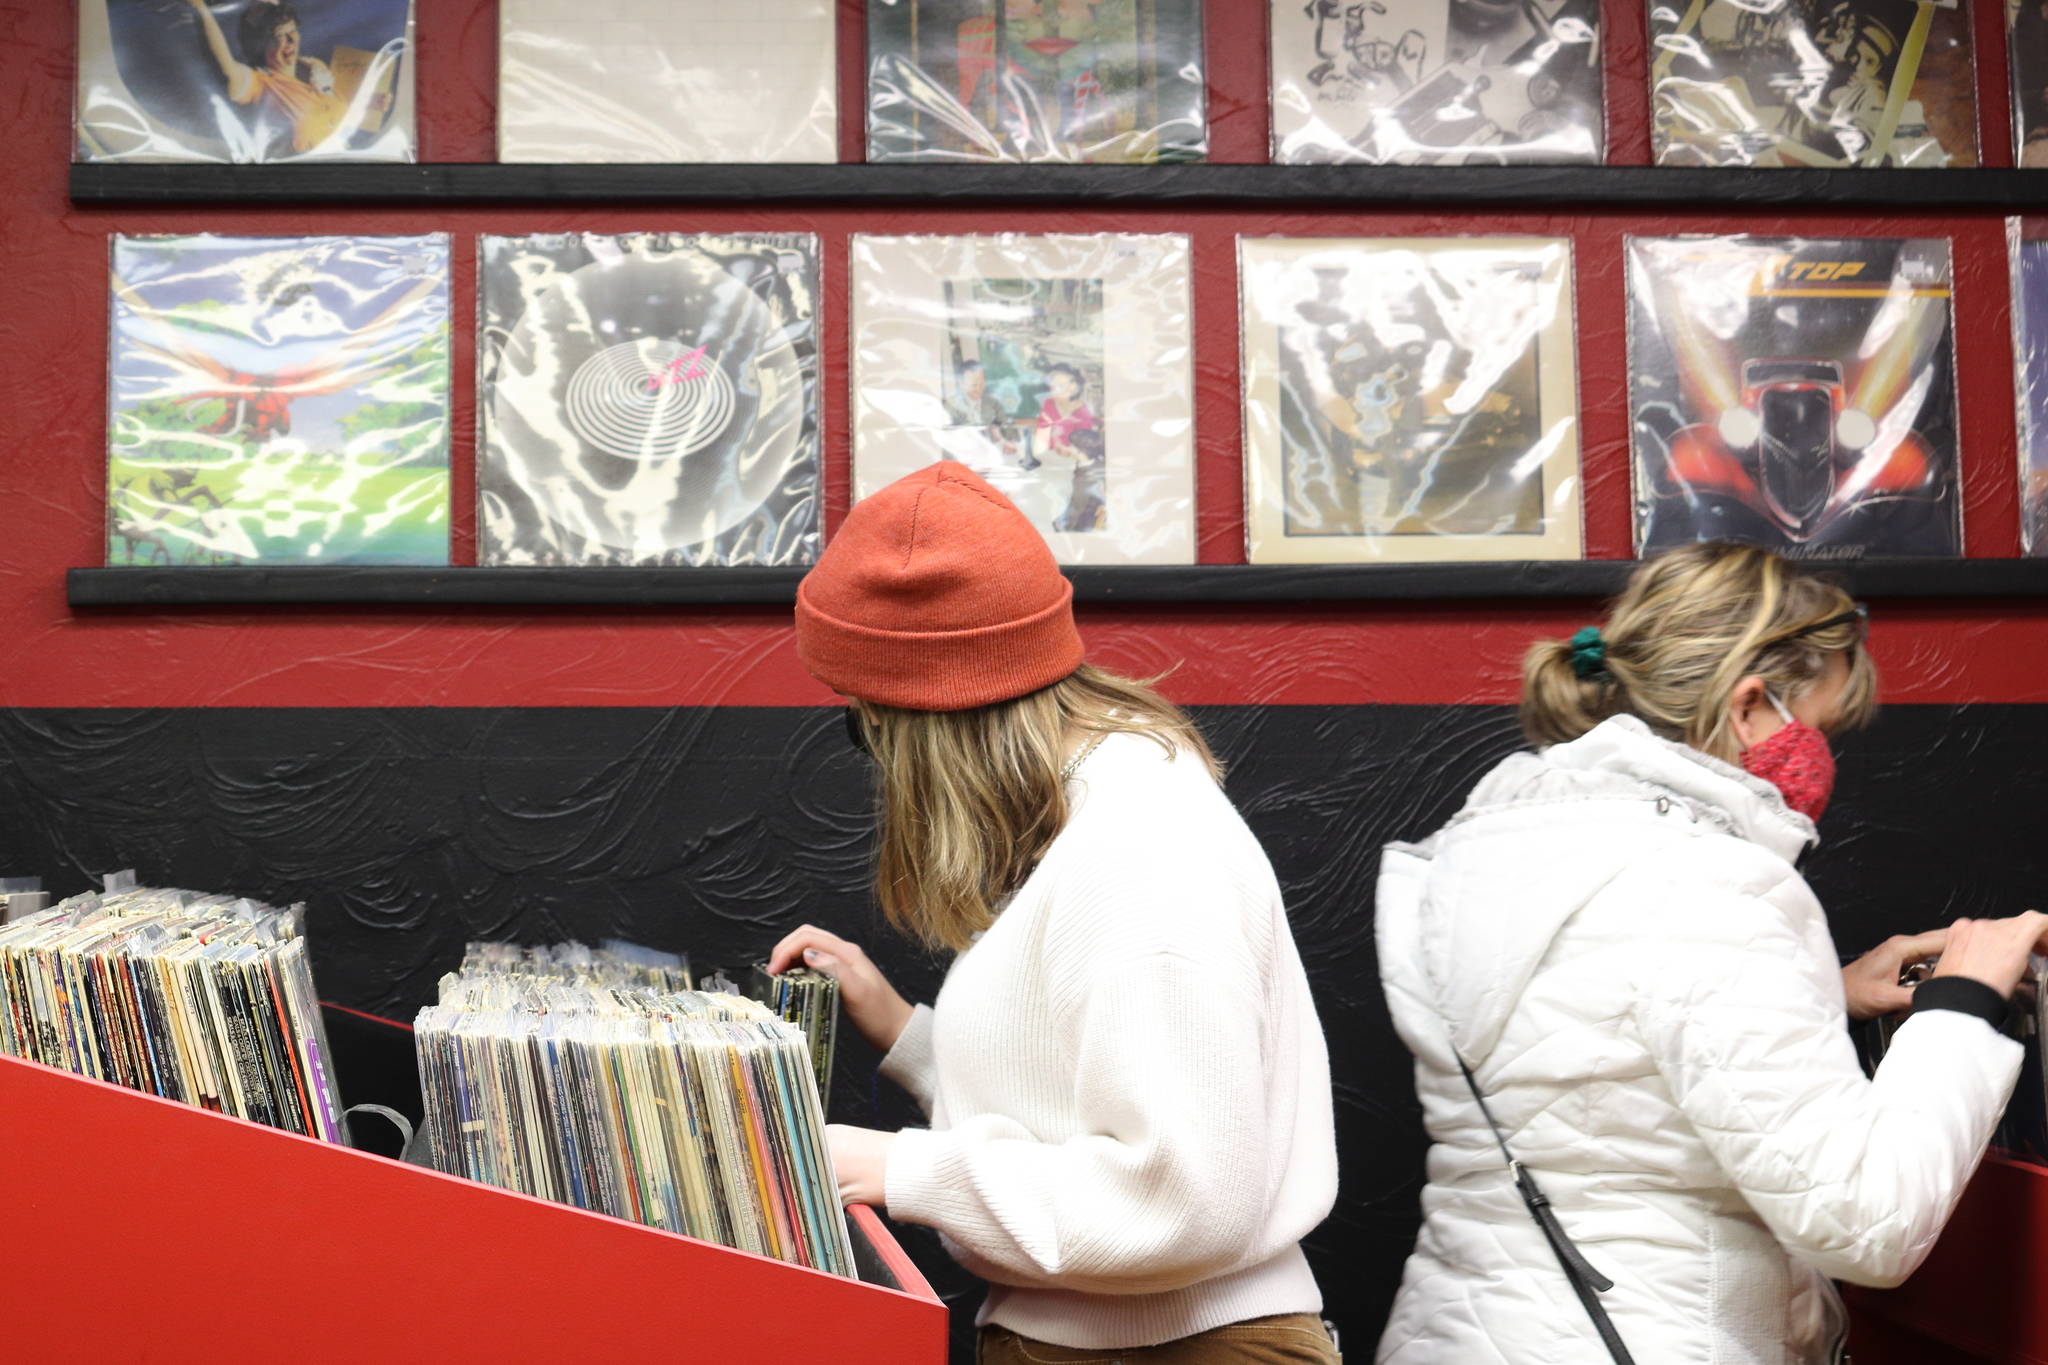 Kaitlyn (left) and Tracy Forst (right) look through records at Hi-Fi Senpai on Saturday, Jan. 30. The two left with vinyl copies of albums by ABBA and Styx. (Ben Hohenstatt / Juneau Empire)